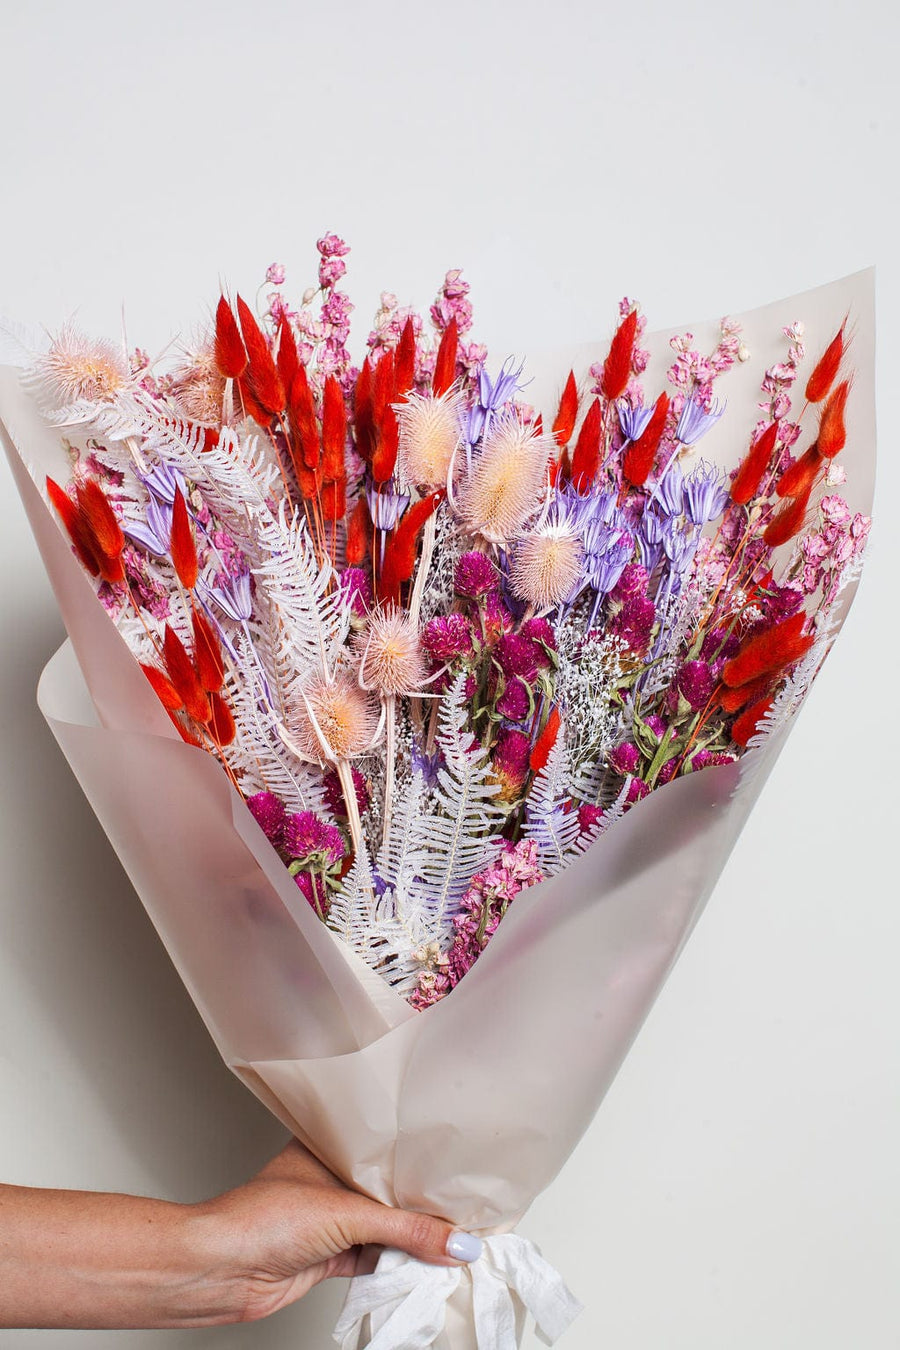 10 Best Dried Flower Arrangements From Shops That Deliver